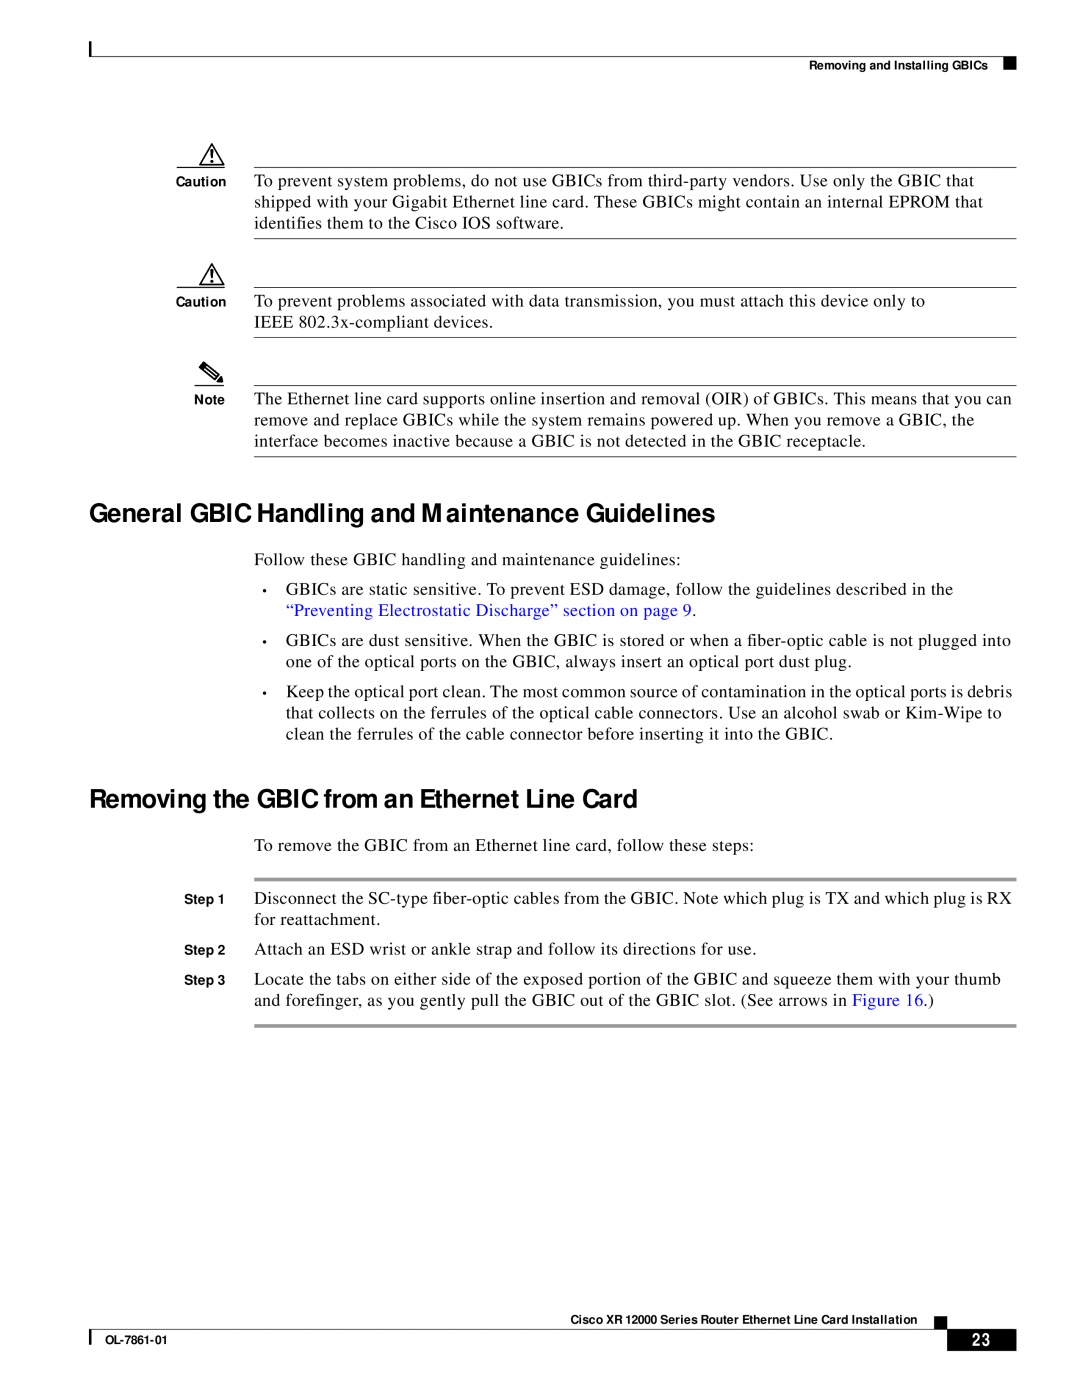 Cisco Systems OL-7861-01 General GBIC Handling and Maintenance Guidelines, Removing the GBIC from an Ethernet Line Card 